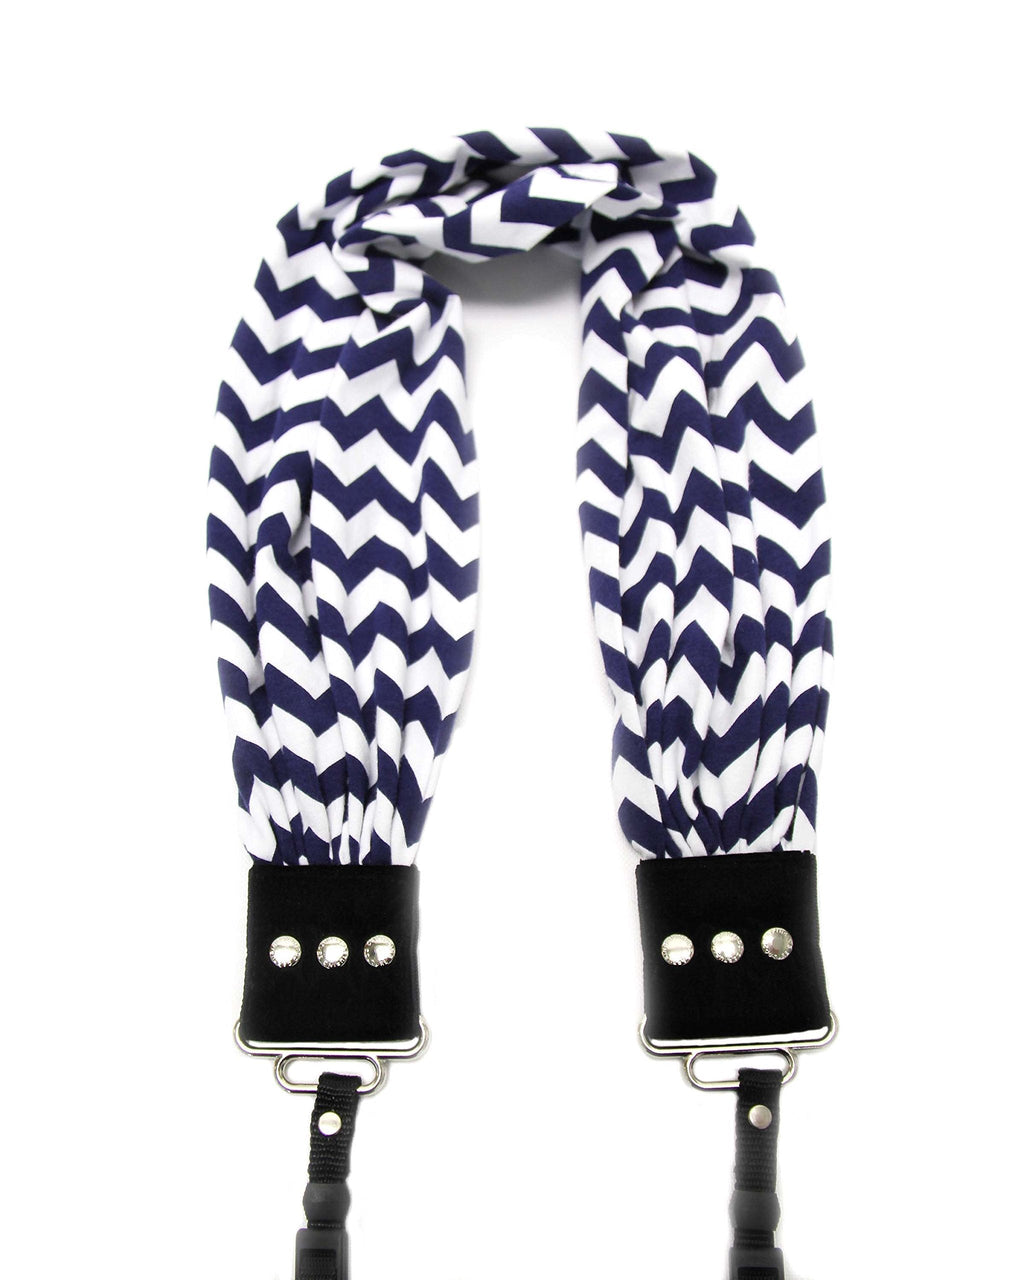 Capturing Couture Adjustable Scarf Camera Strap for DSLR or Mirrorless Camera, Stretch Material, USA Made - Chevron Navy Blue